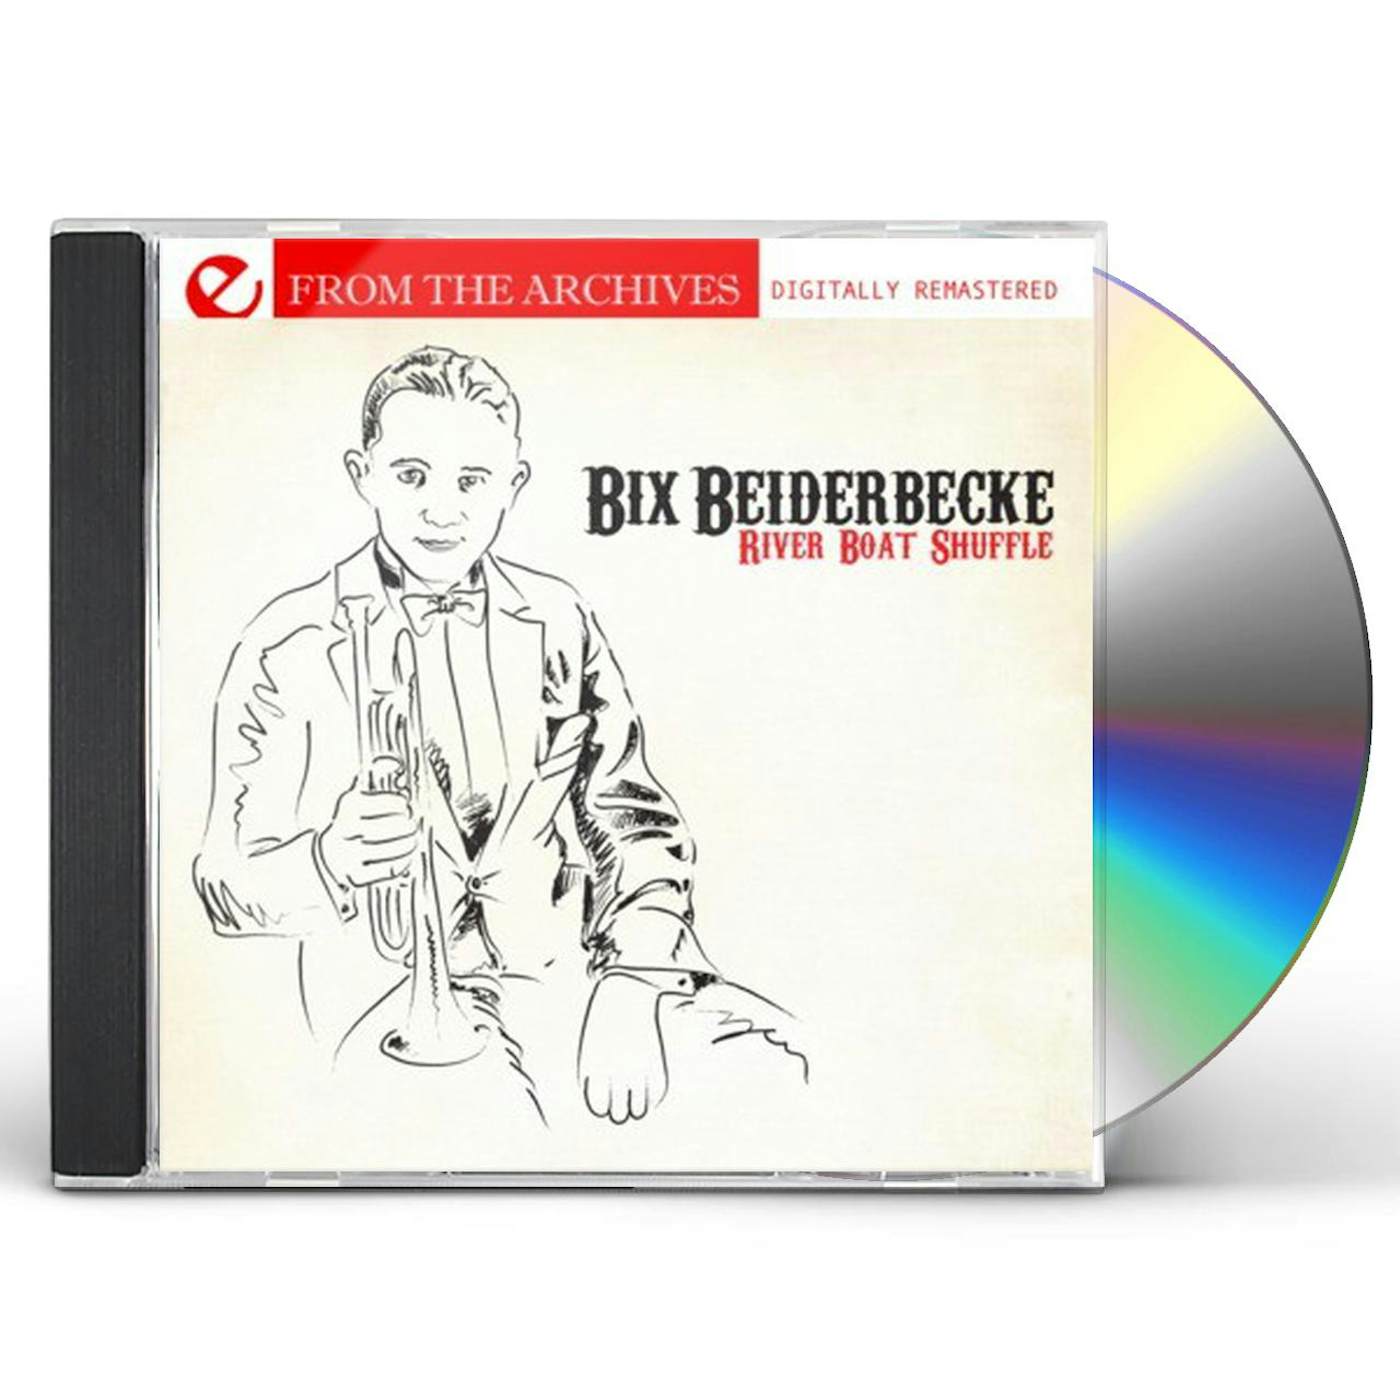 Bix Beiderbecke RIVERBOAT SHUFFLE - FROM THE ARCHIVES CD